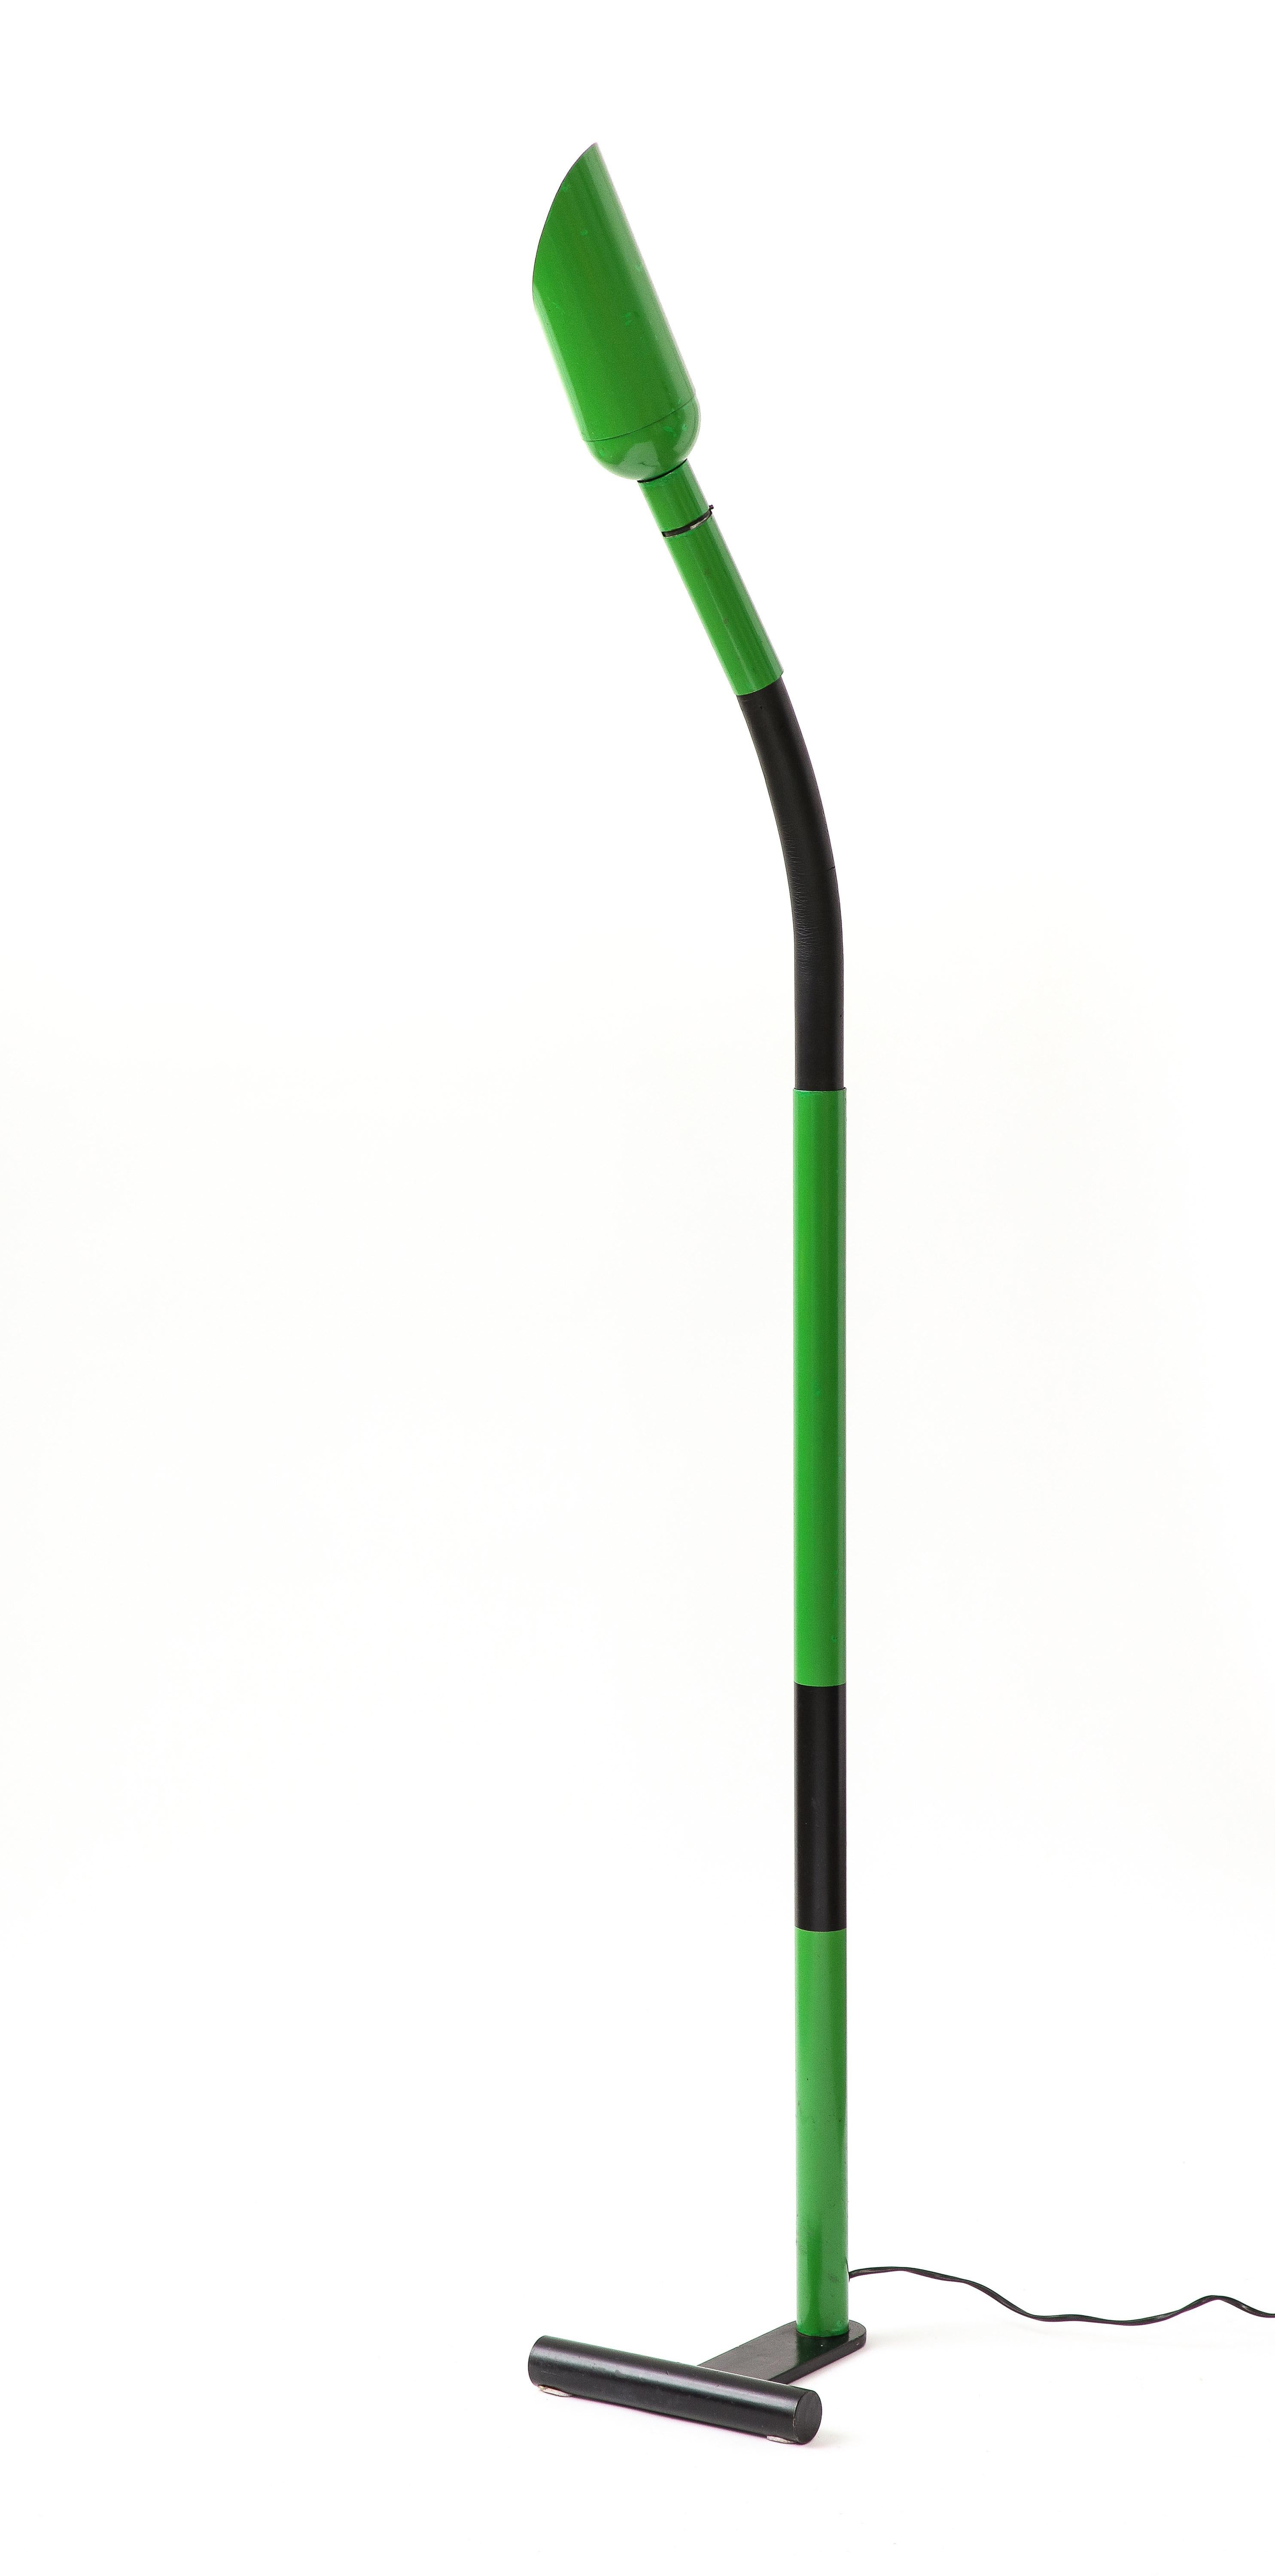 Lacquered Green Metal Floor Lamp, Italy, c. 1970 For Sale 3